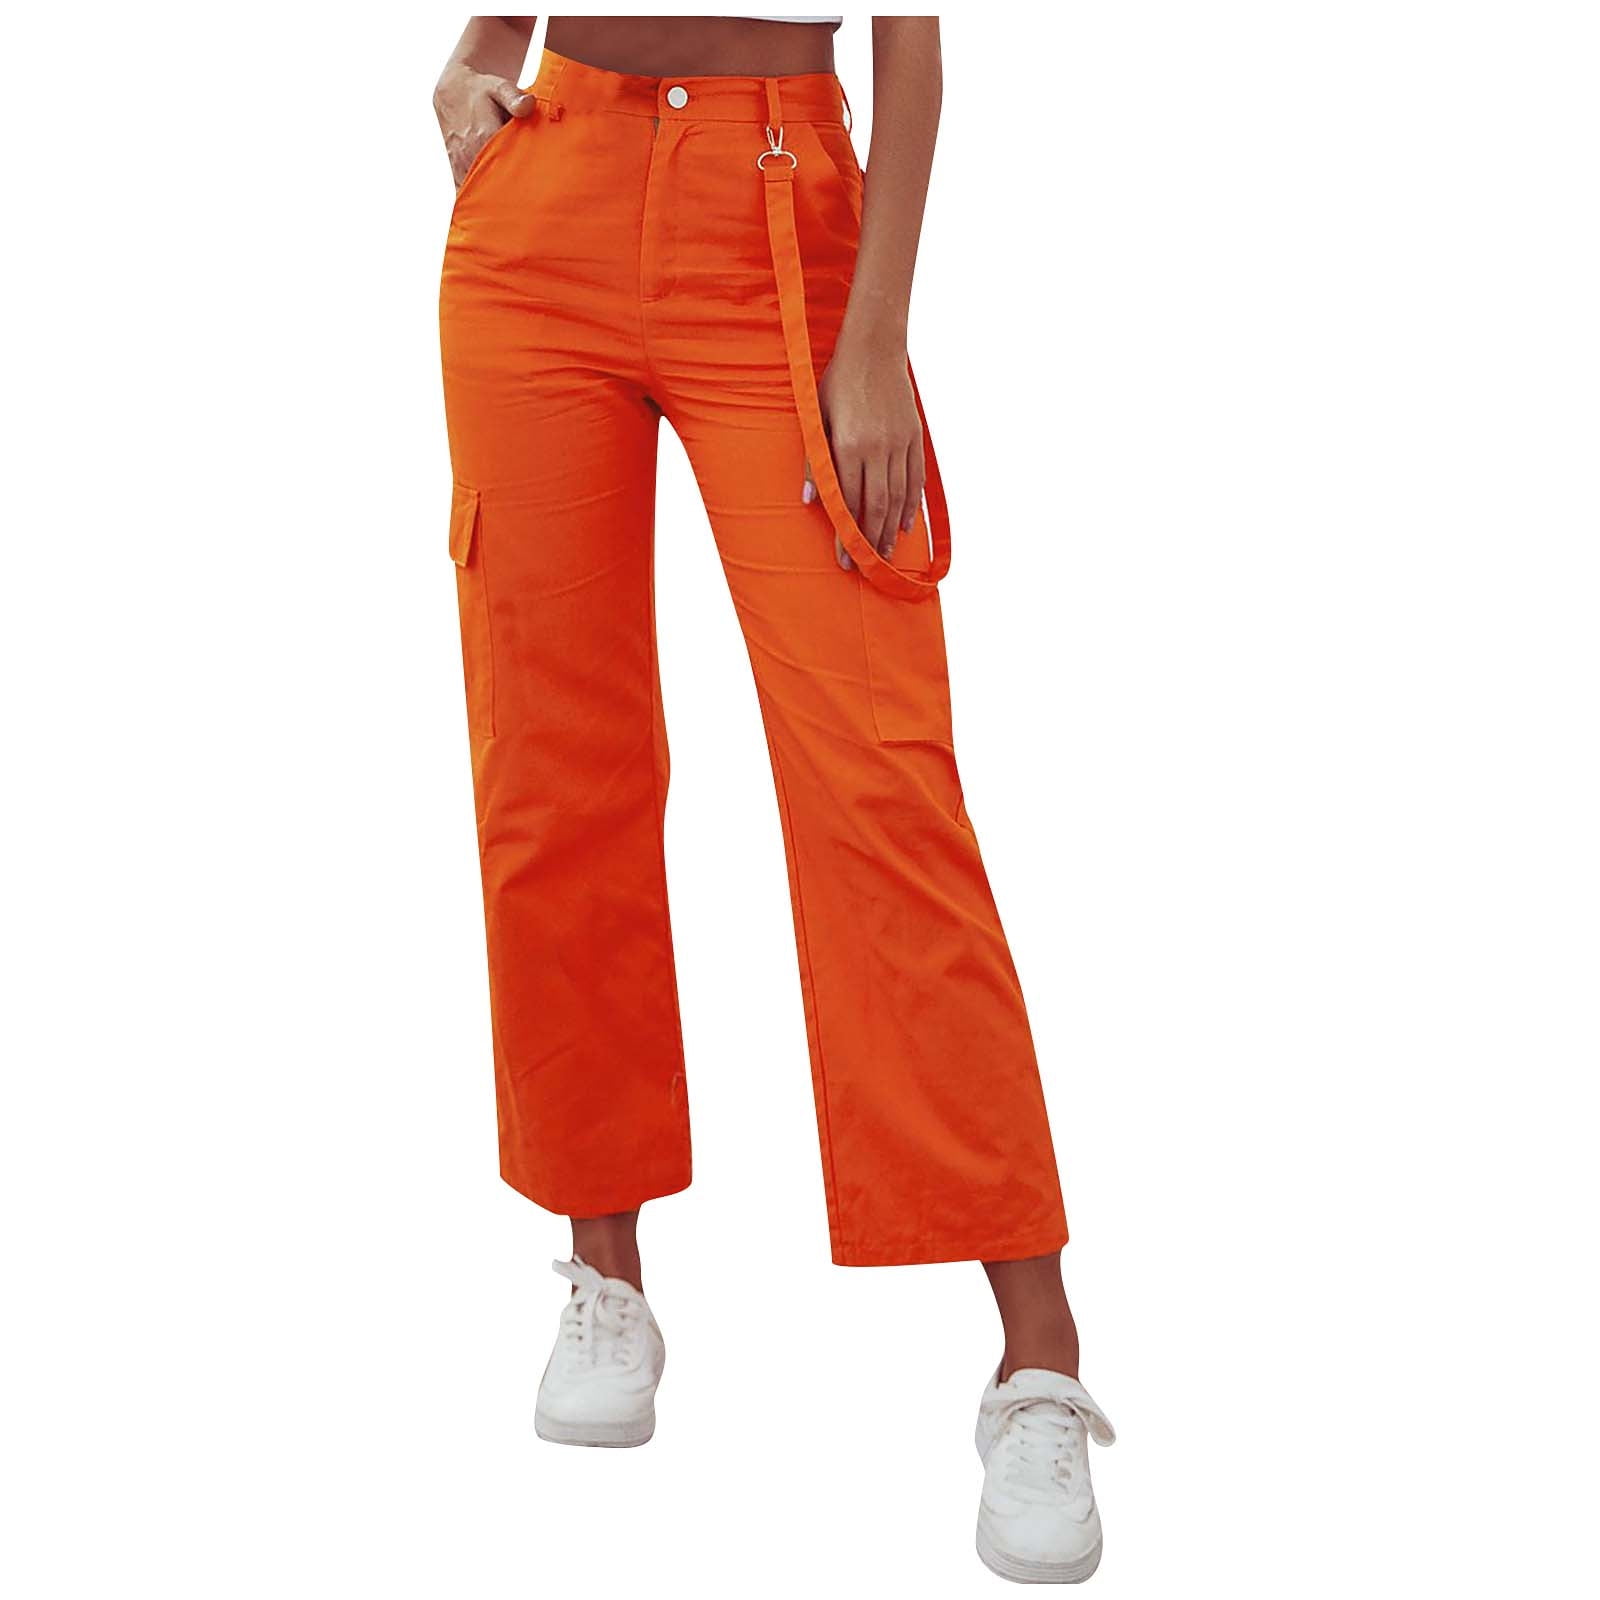 YWDJ Pants for Women Trendy Thicken Fashion Casual Pocket High